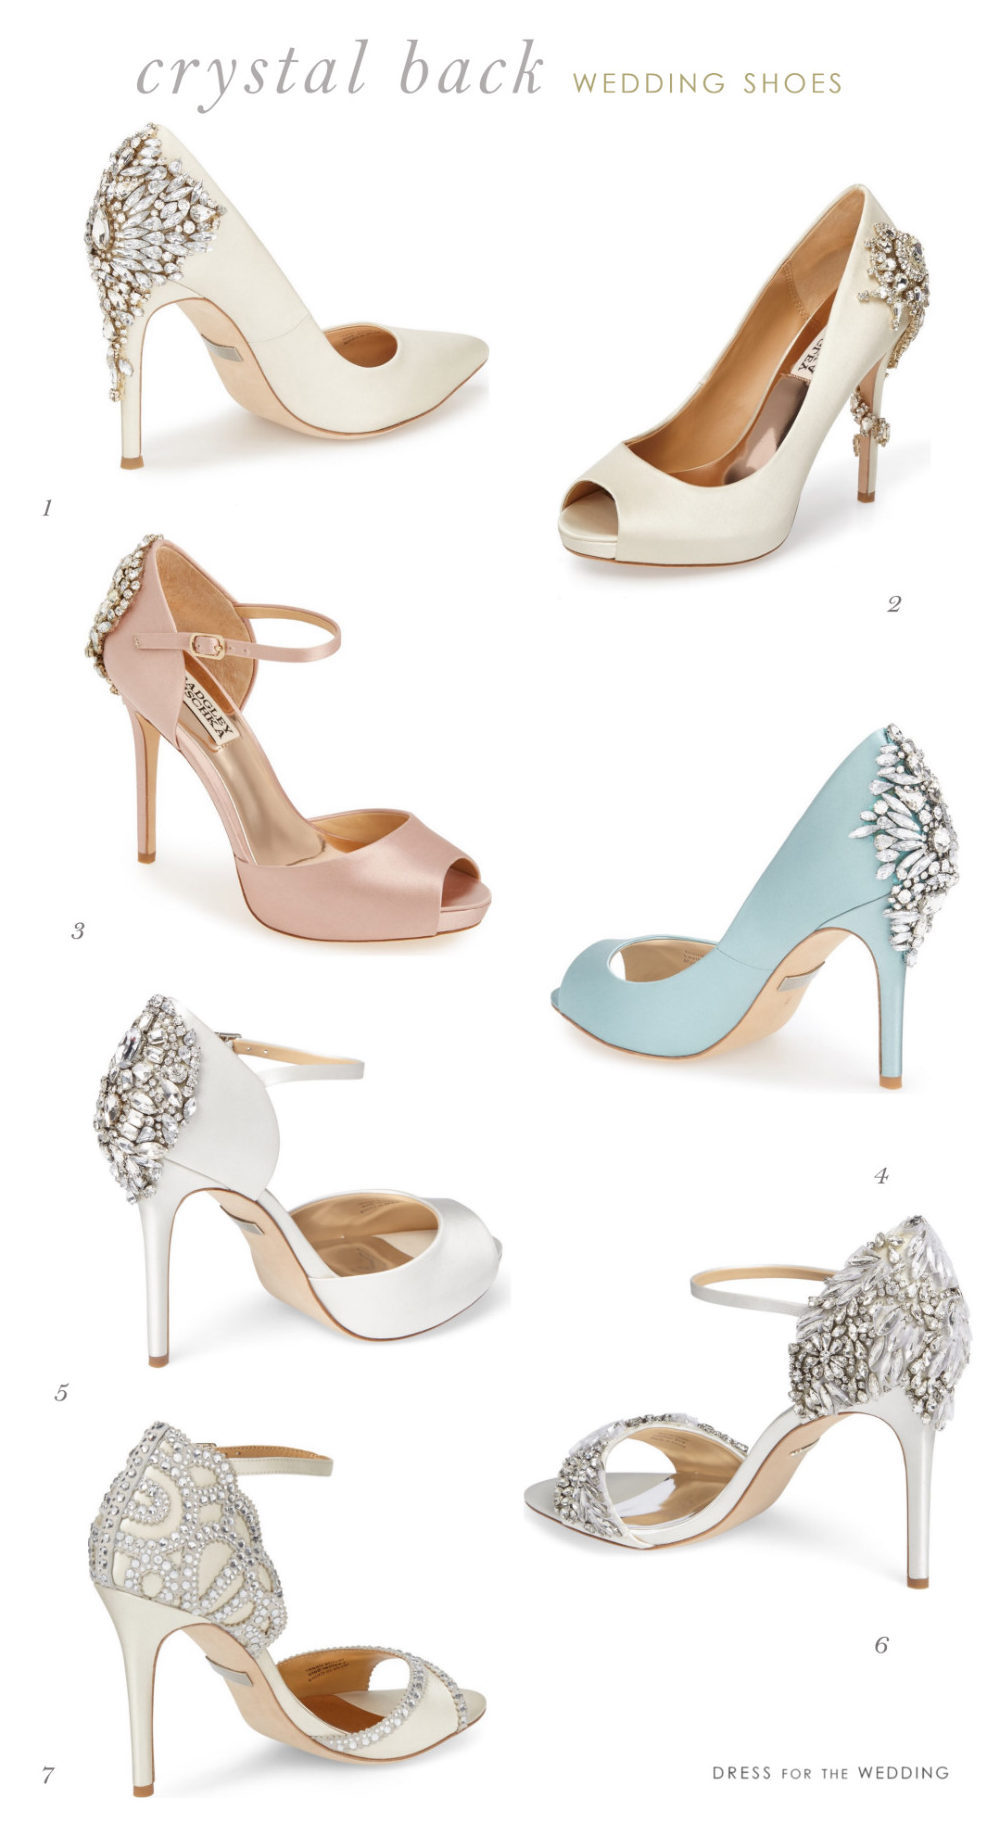 Crystal Back Wedding Shoes: The Perfect Bridal Shoe! - Dress for the ...